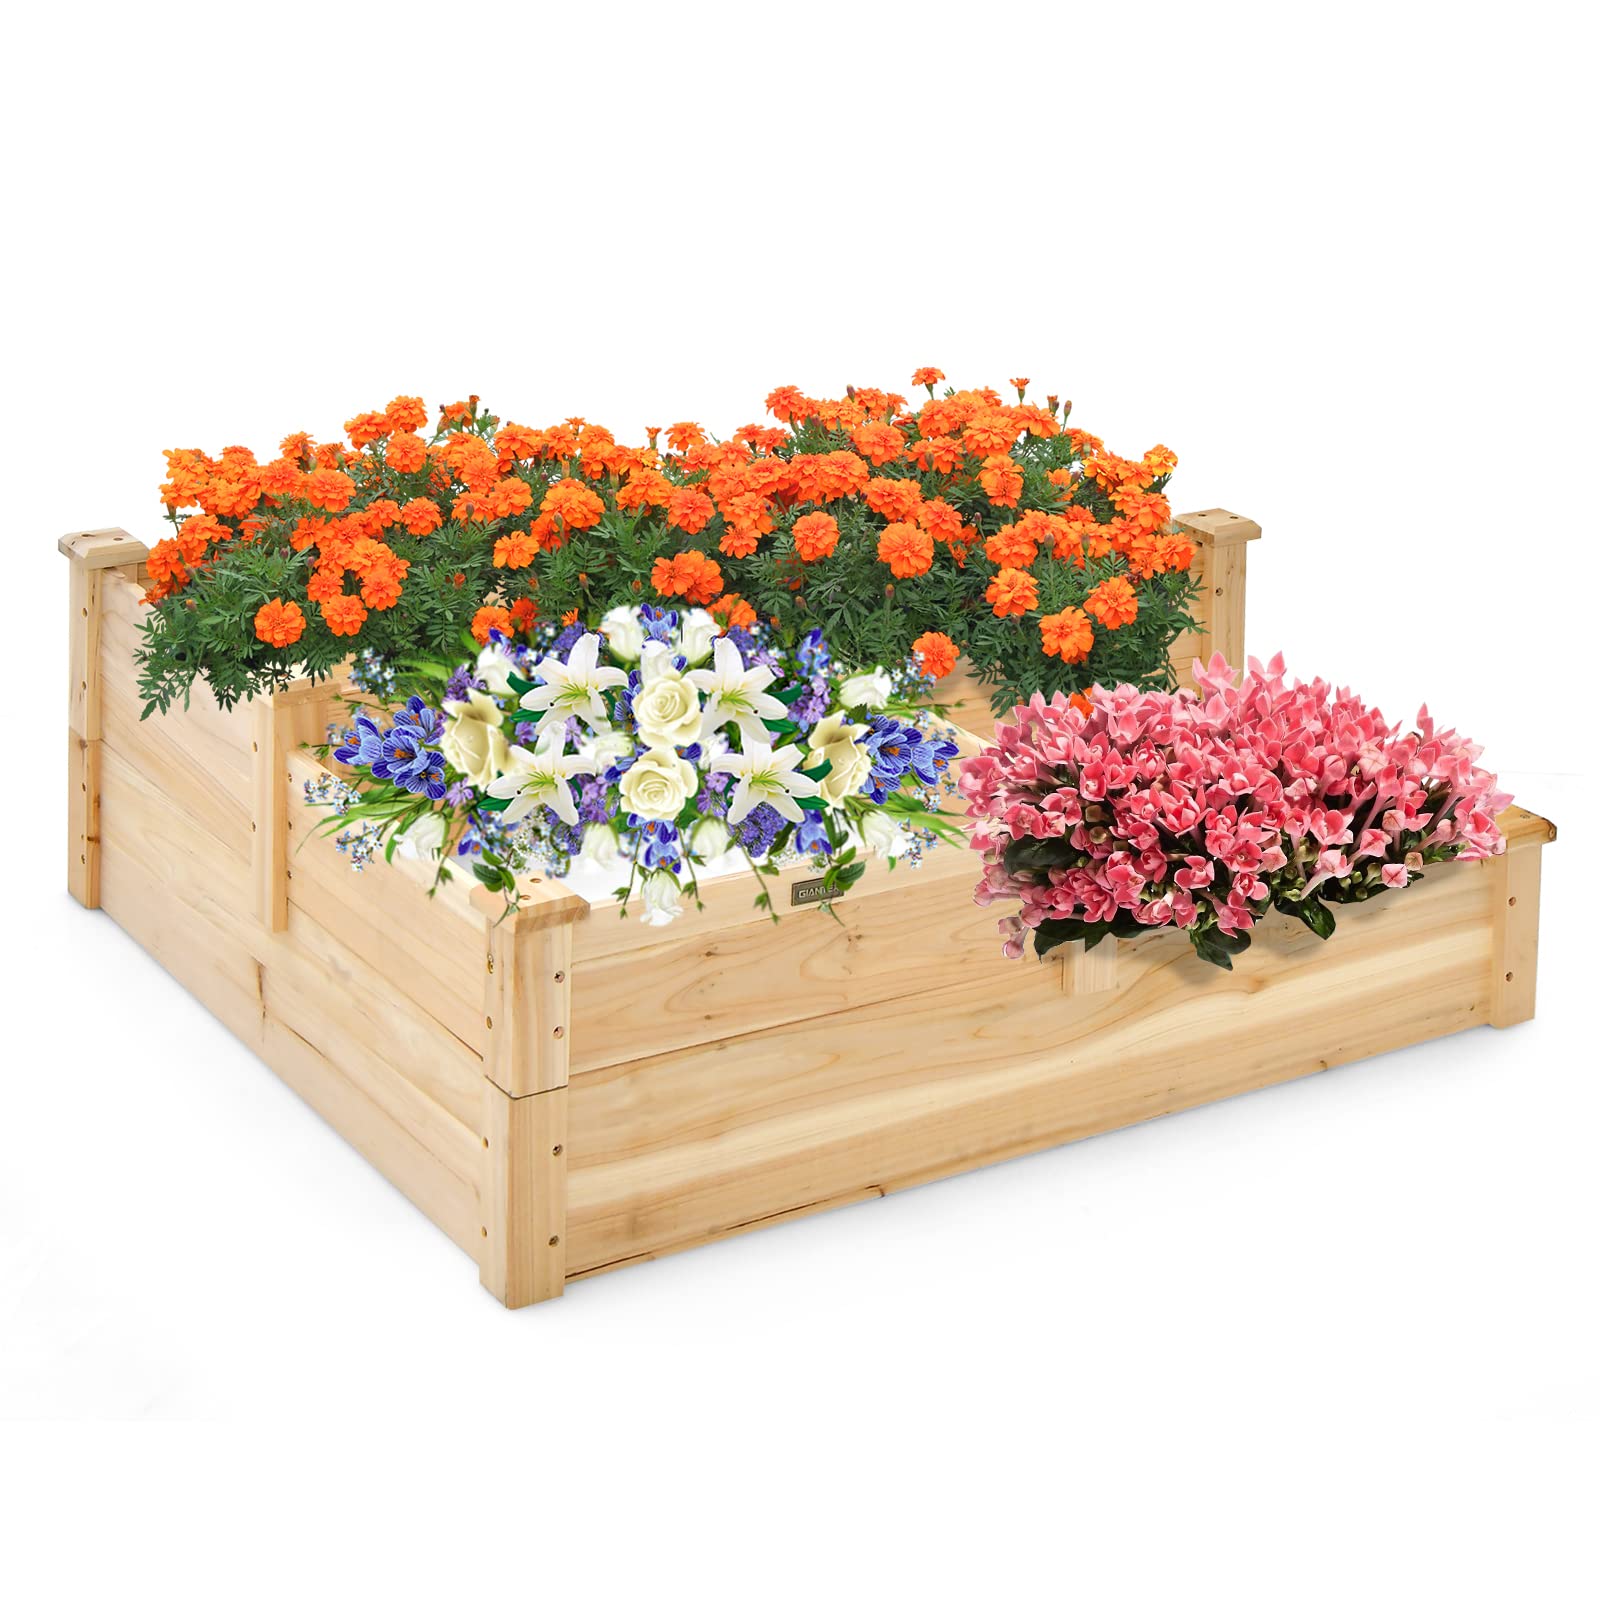 Giantex Raised Garden Bed, Wood Planter Box for Vegetables Flowers Fruit Herb, Easy Assembly (42.5" Lx34.5 Wx14.5 H)